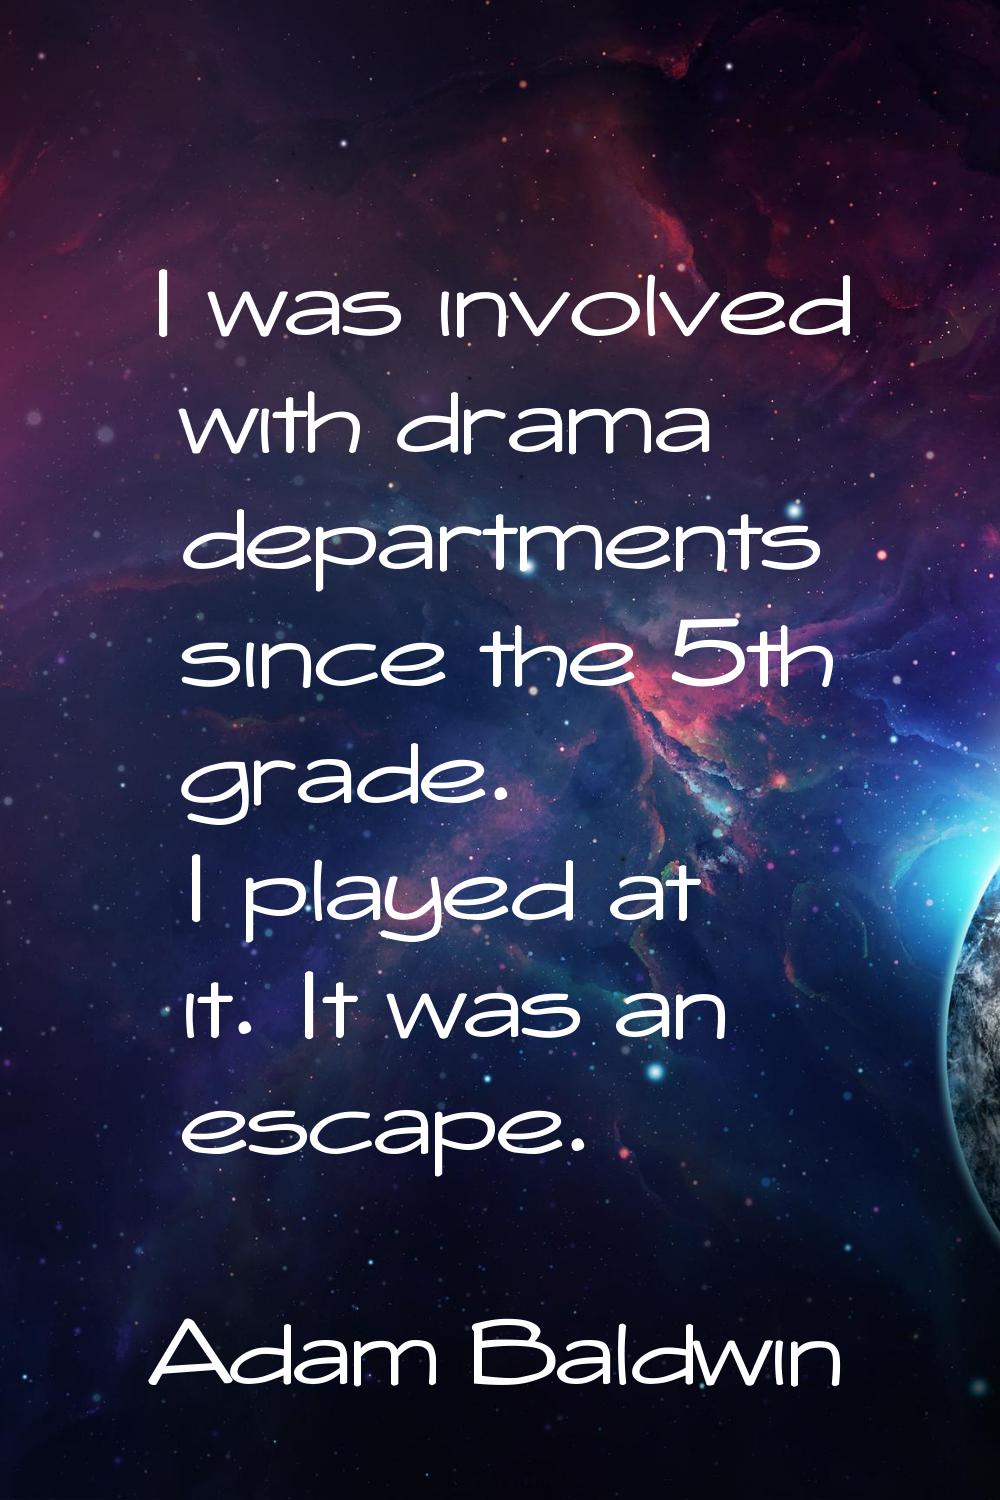 I was involved with drama departments since the 5th grade. I played at it. It was an escape.